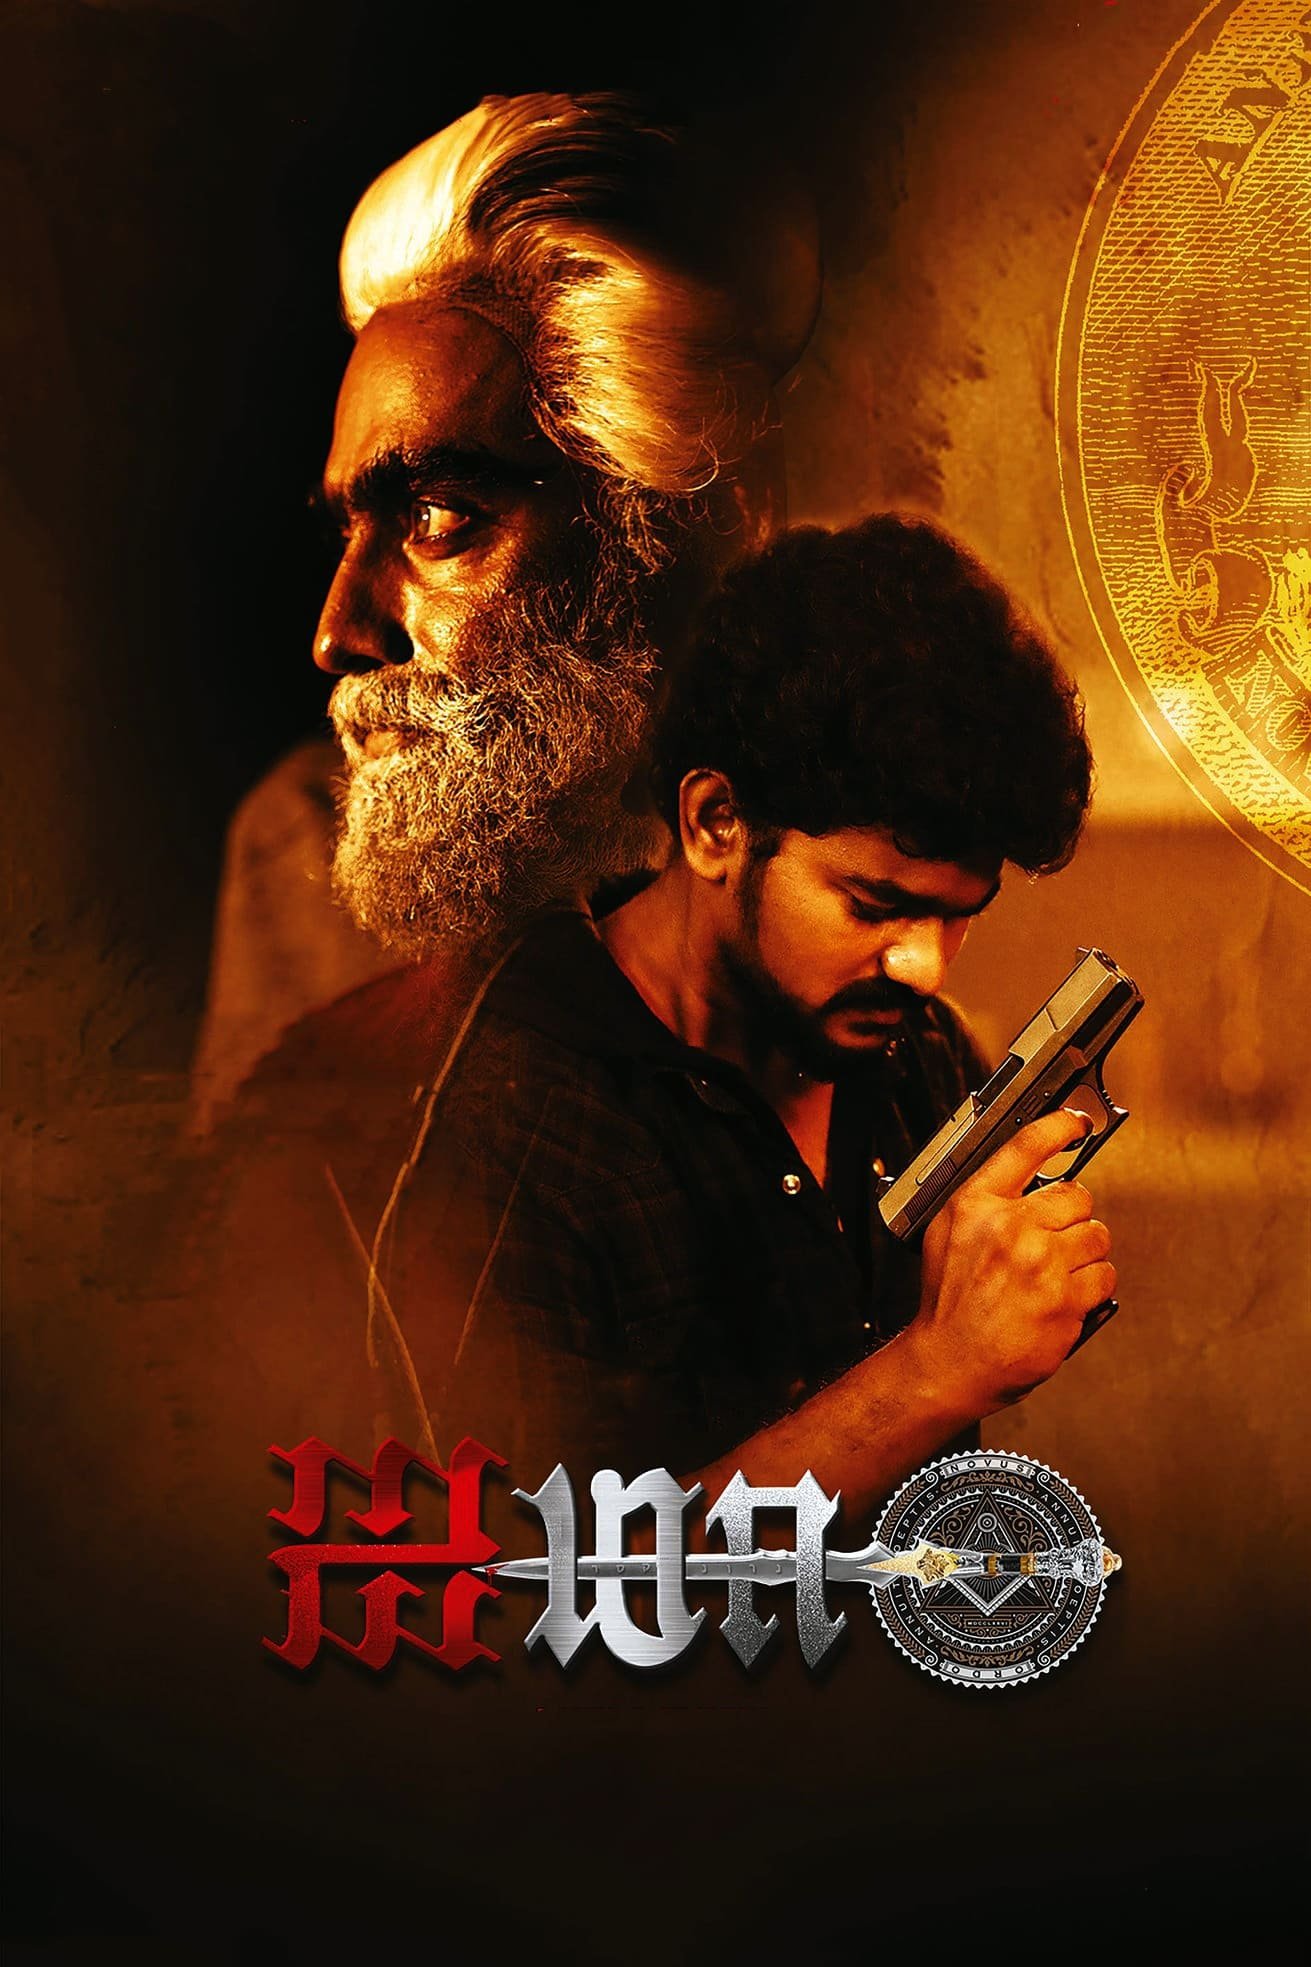 Poster for the movie "Aima"